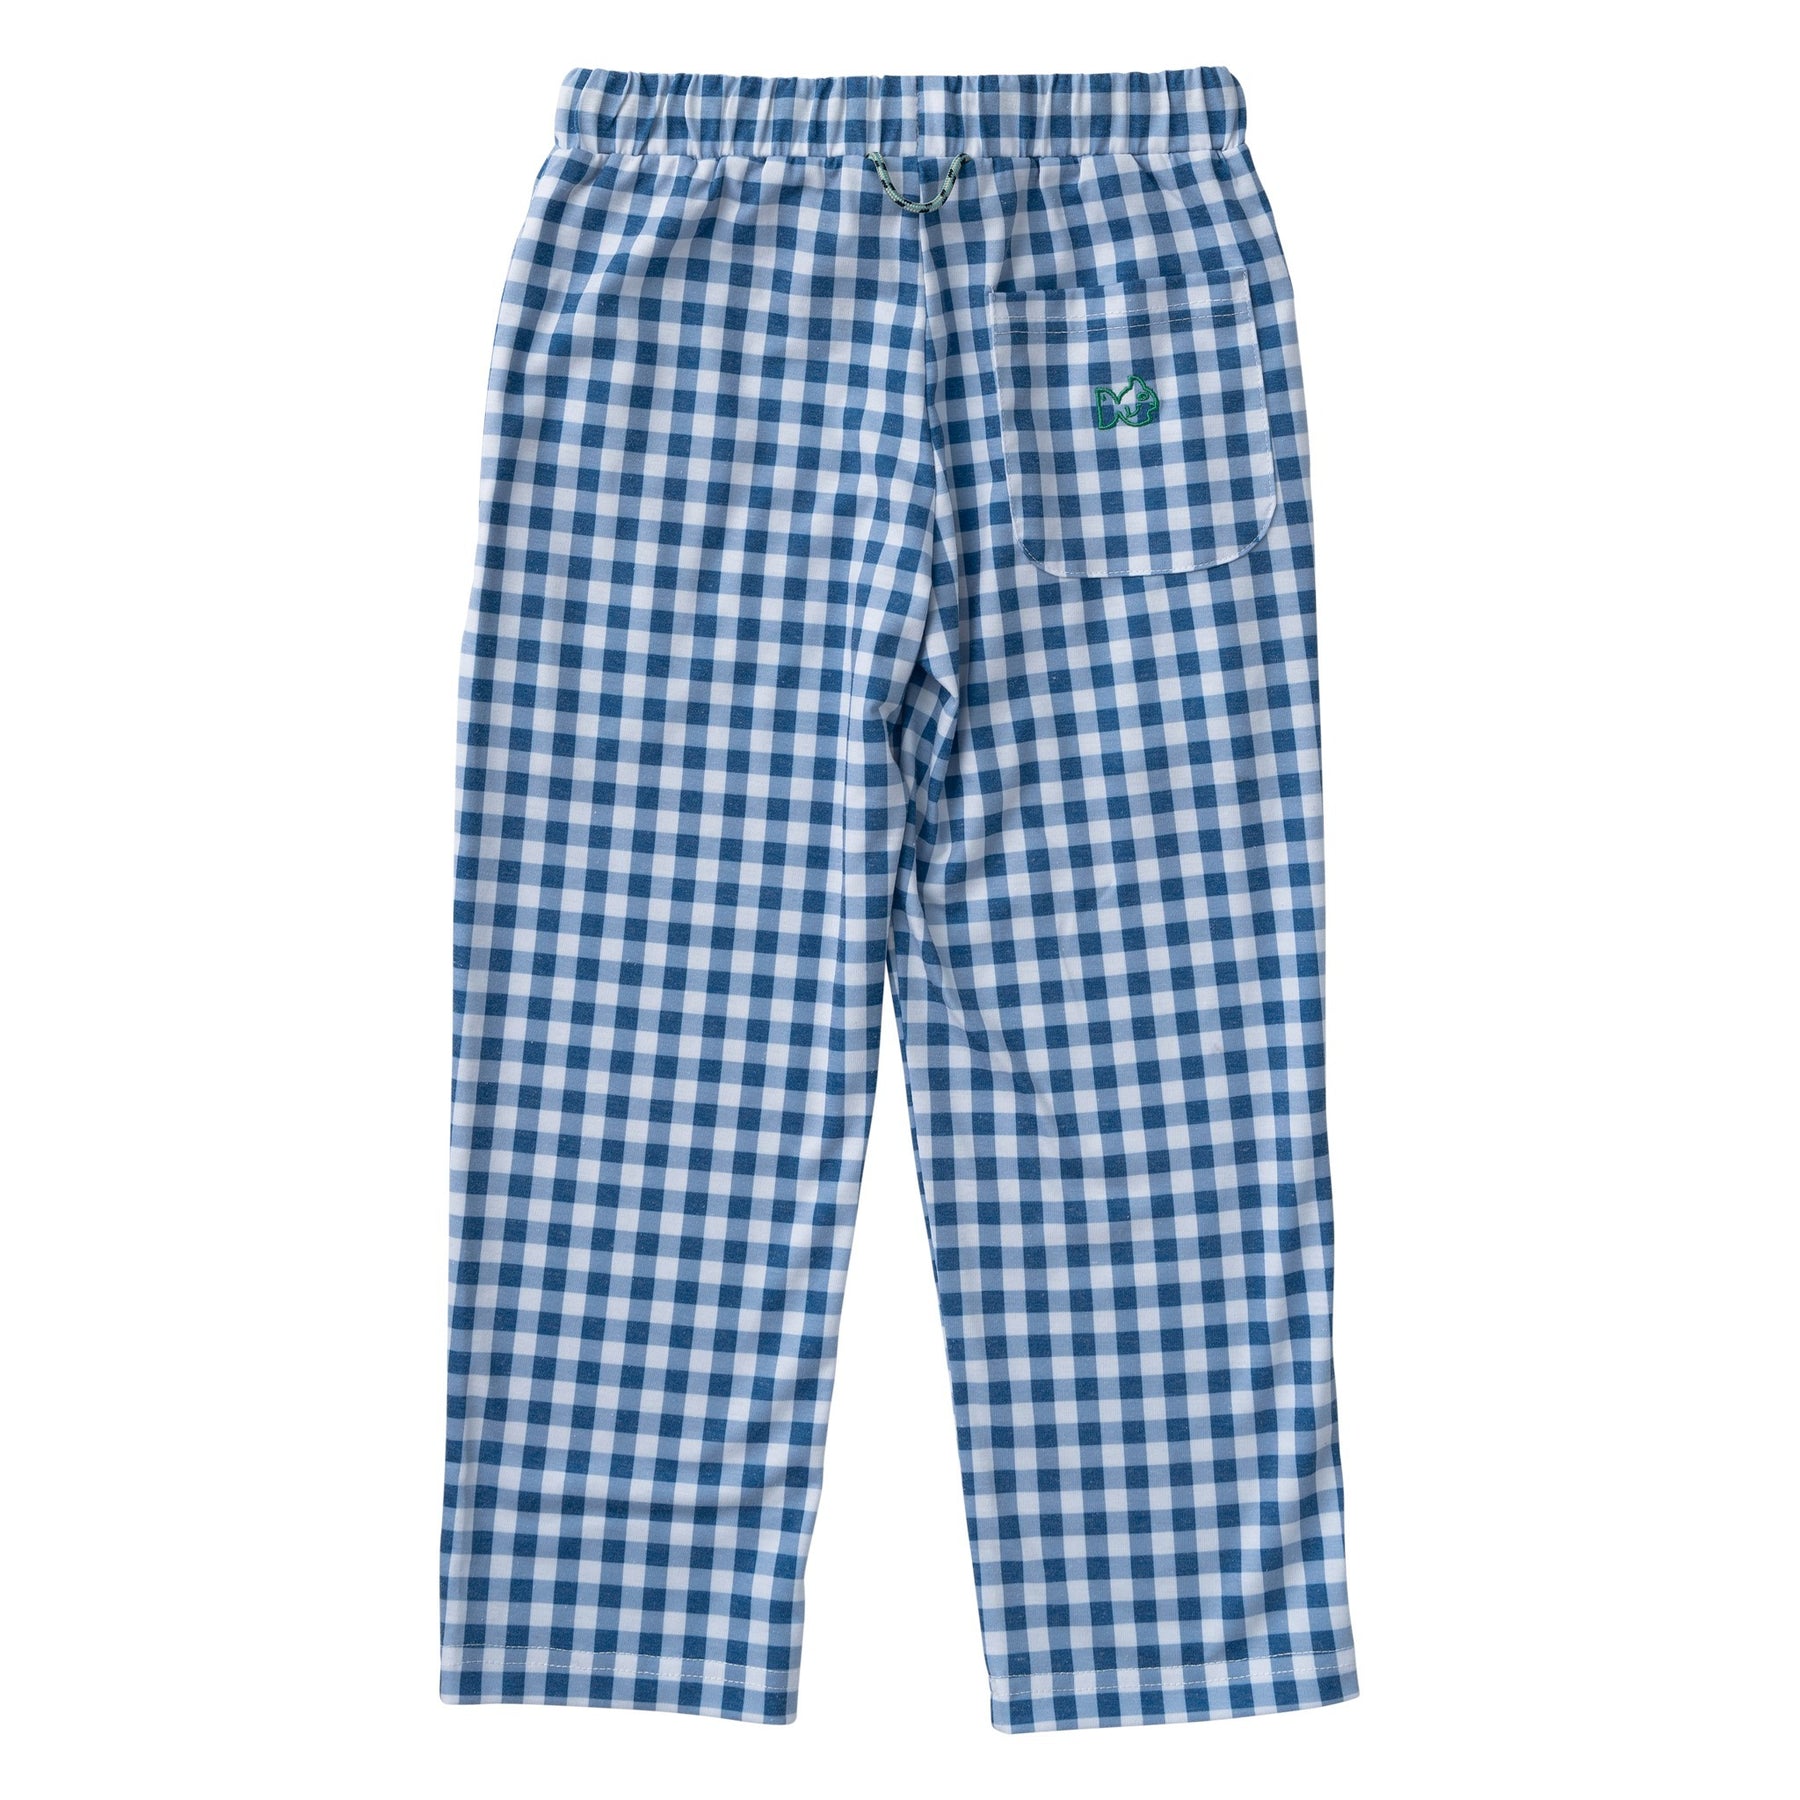 Kids Lounge Life Pant with Navy Gingham | PRODOH